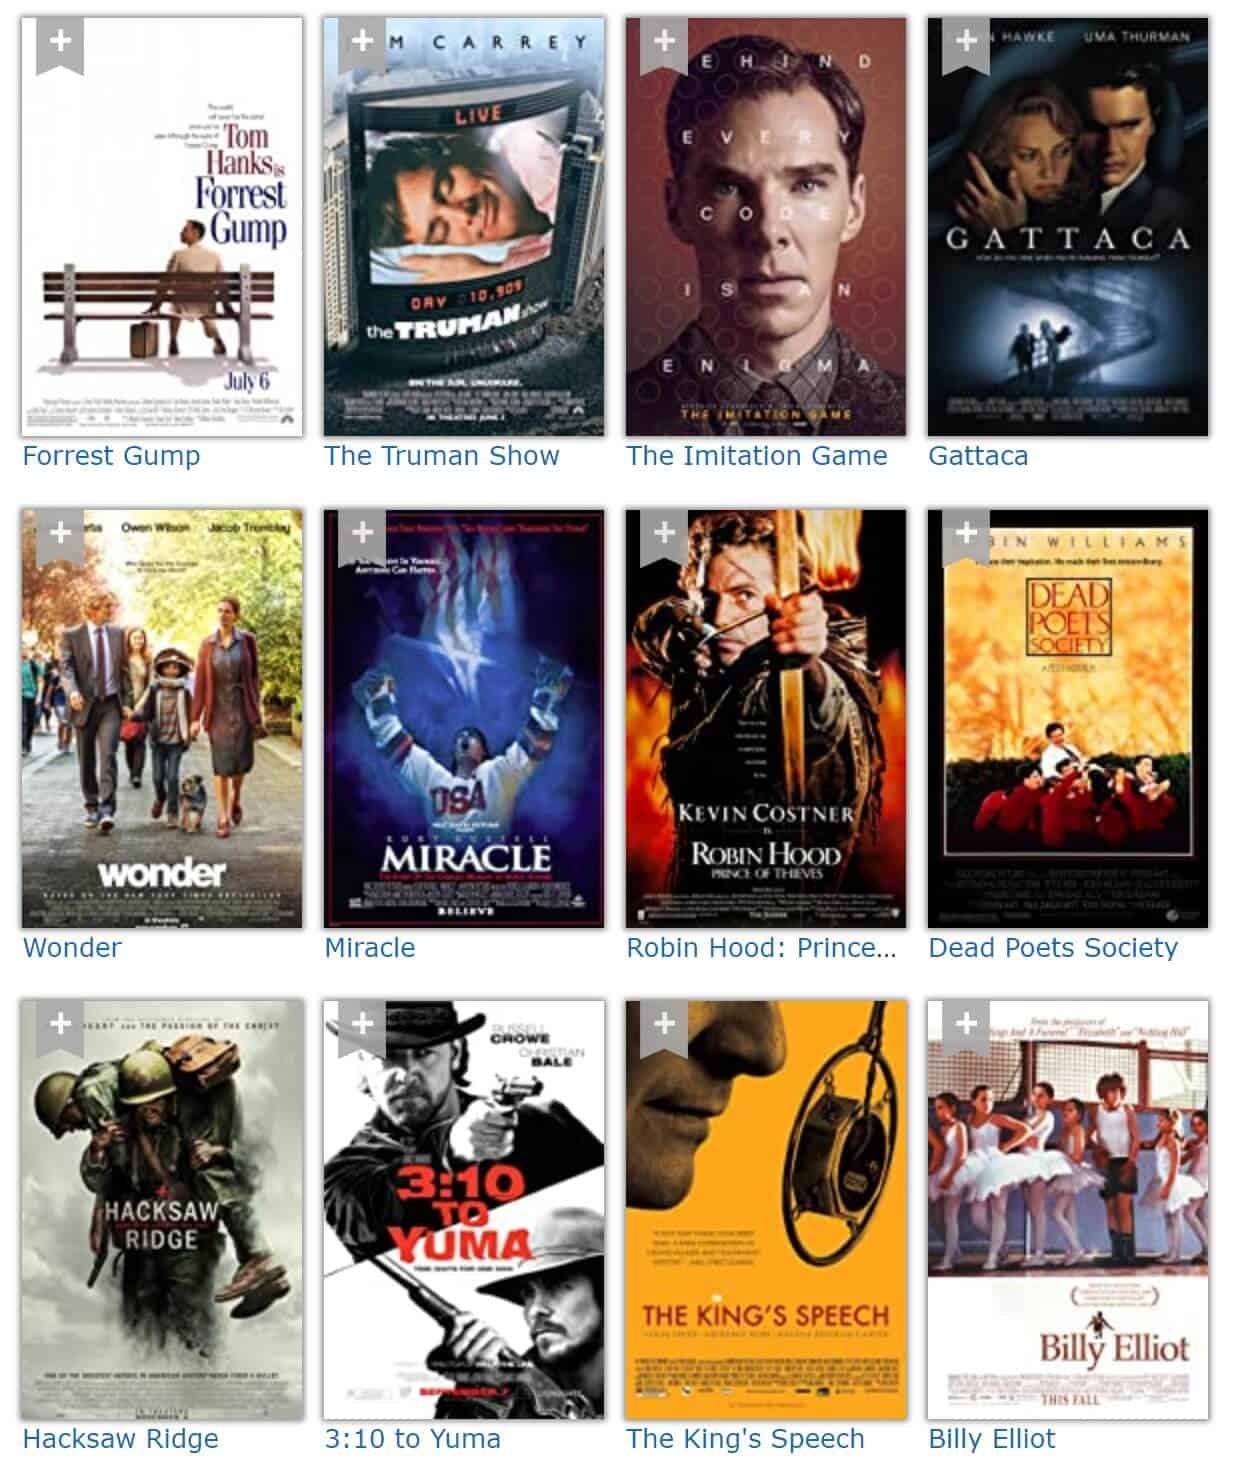 Movies we've watched and discussed - part 1